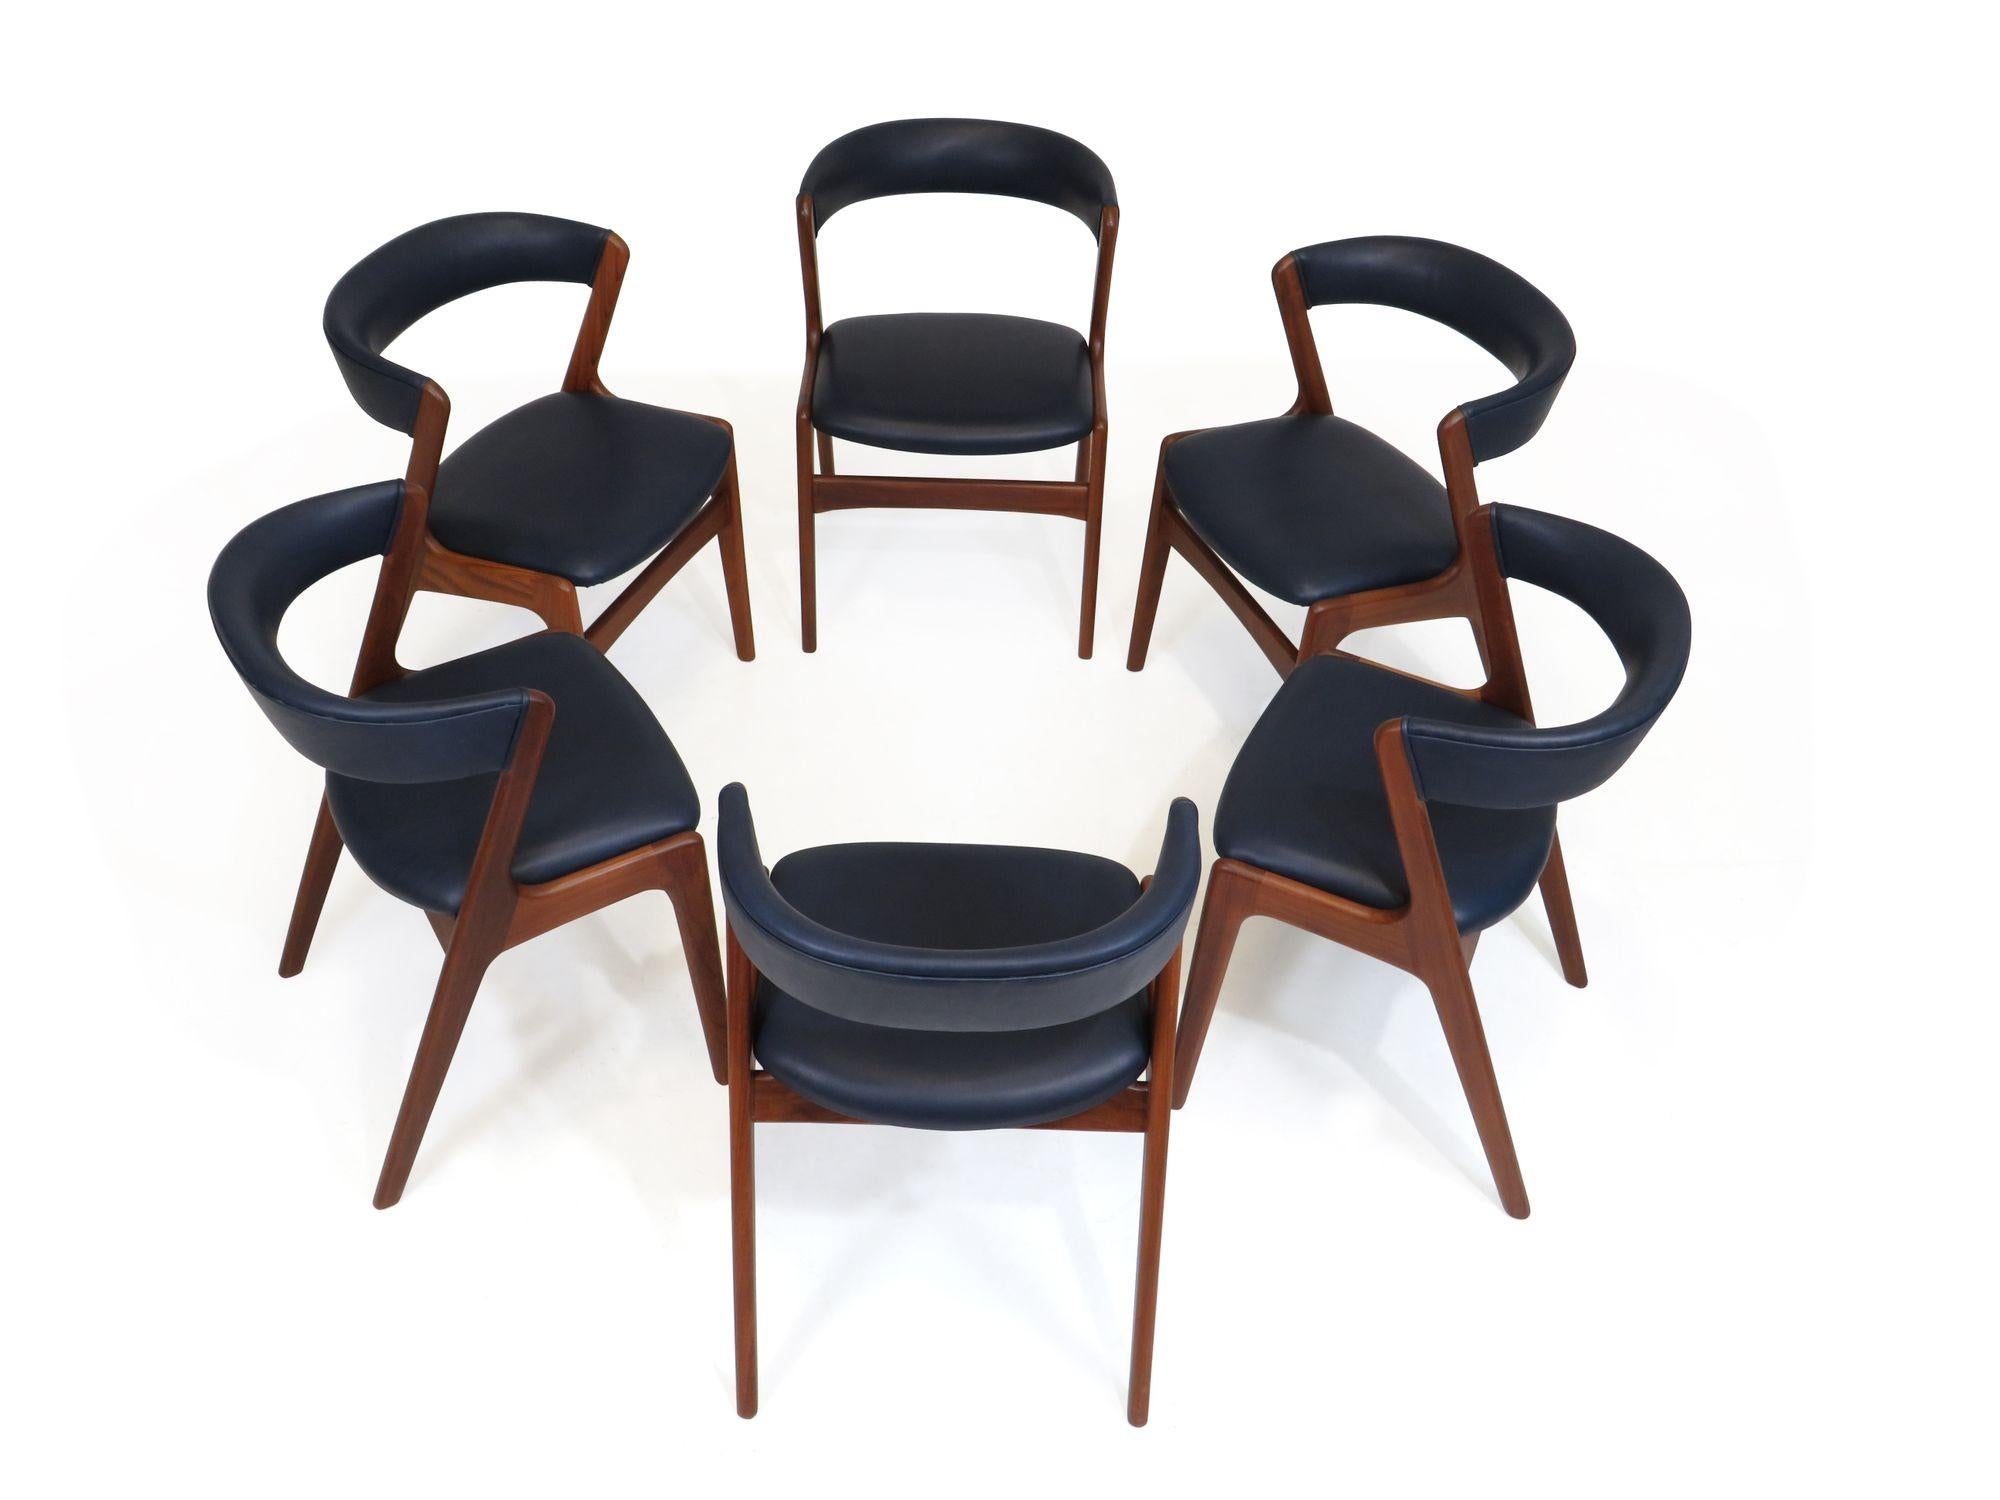 Set of six Mid-century Danish dining chairs designed by Kai Kristainsen, 1959, Denmark. Handcrafted of solid walnut with dramatic curved backs. Perfectly restored and upholstered in a full-aniline blue dyed leather with very soft feel over natural